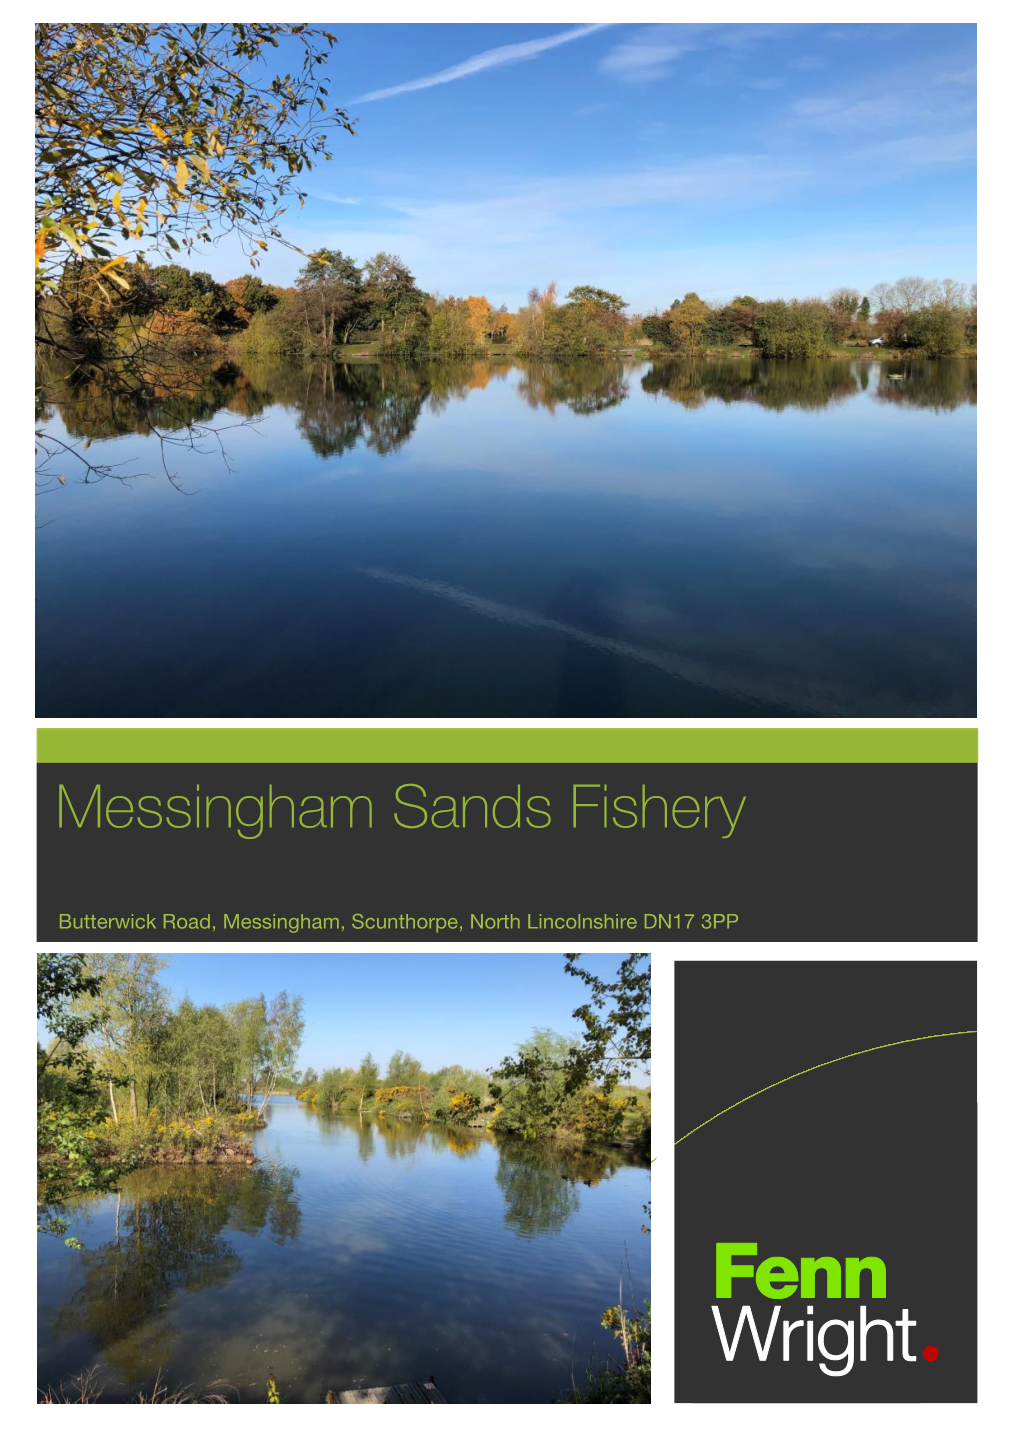 Messingham Sands Fishery